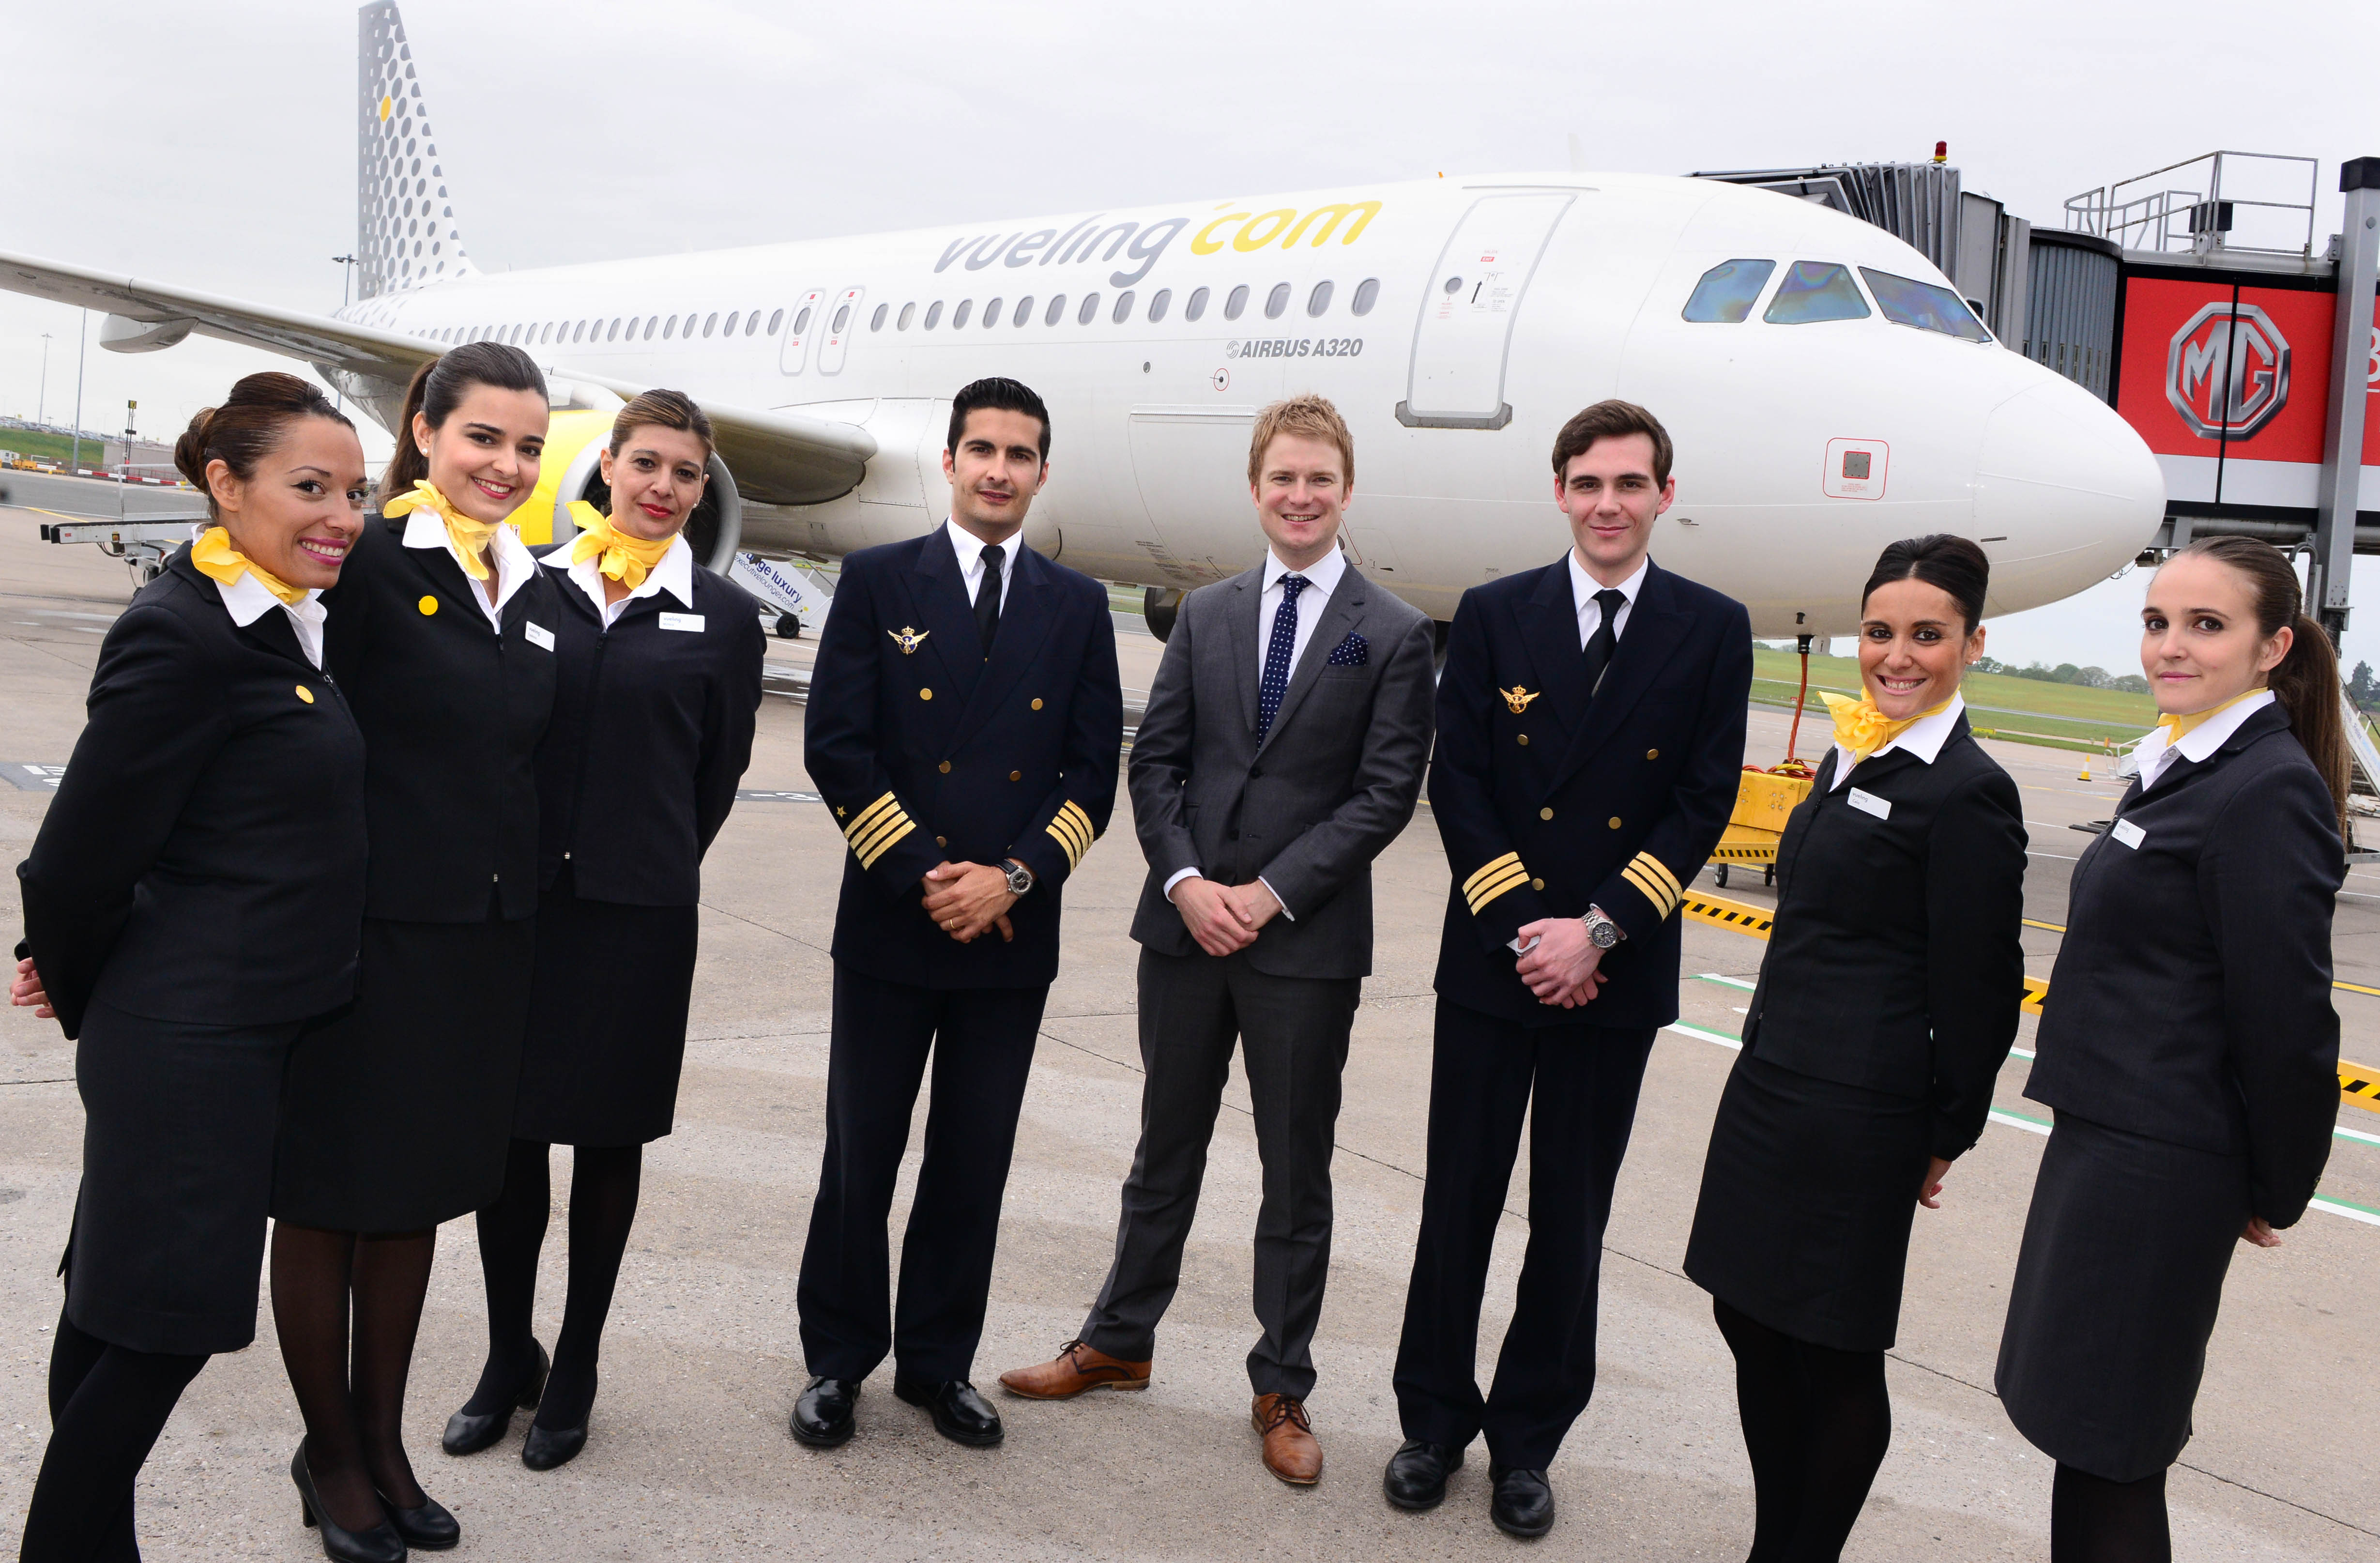 Spanish Airline Vueling Launches from Birmingham Airport ...